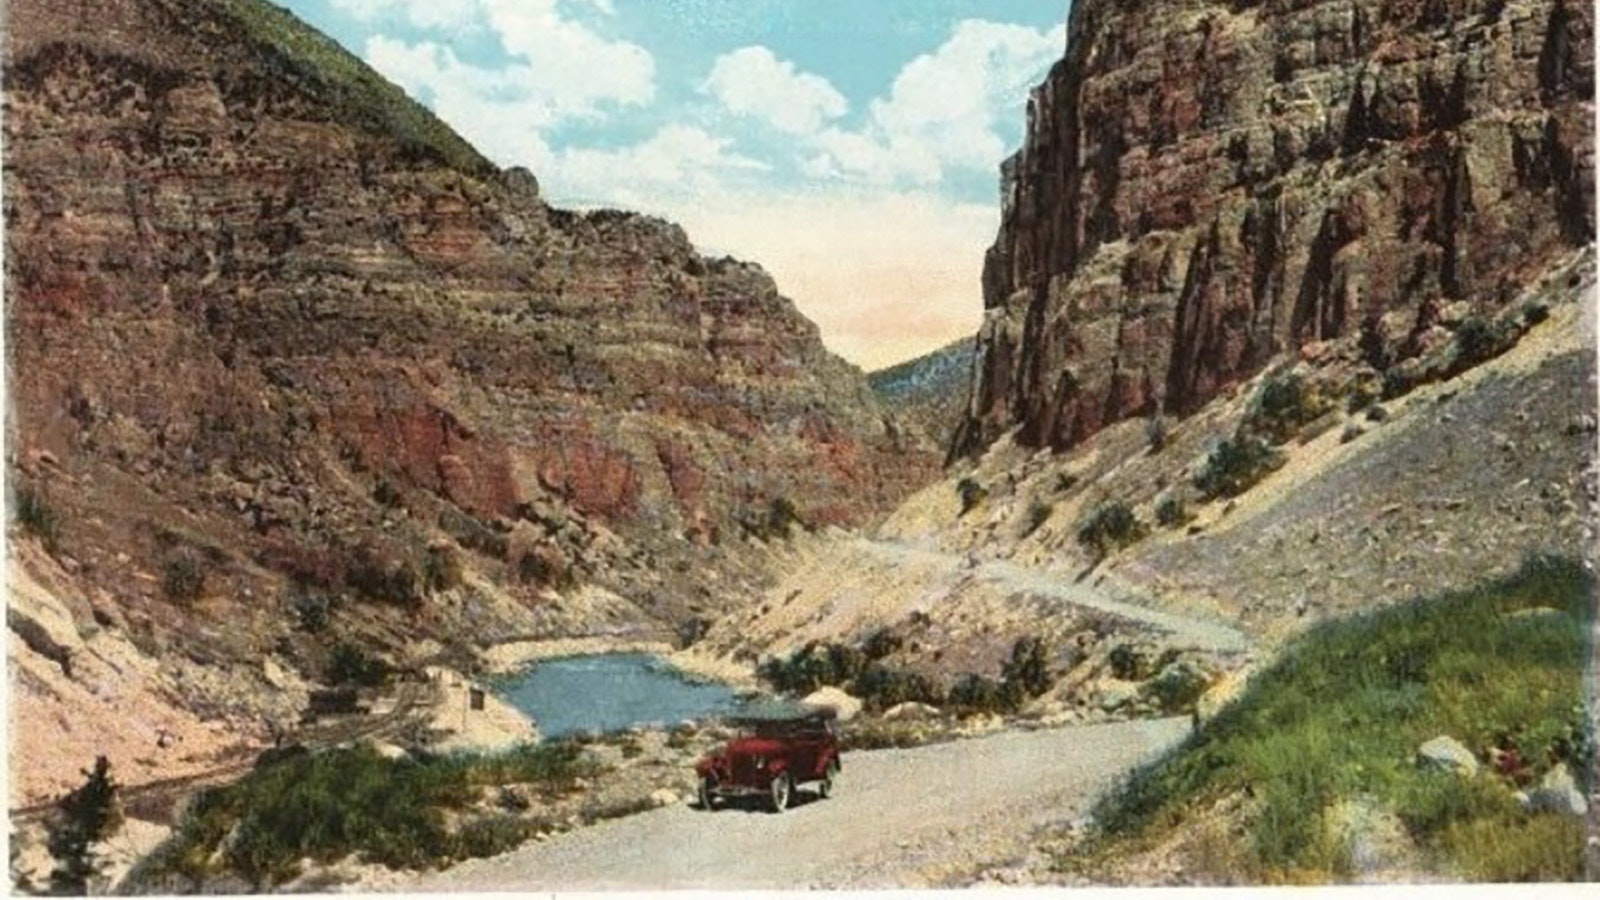 This vintage post card shows the road that became the Wind River Scenic Byway.